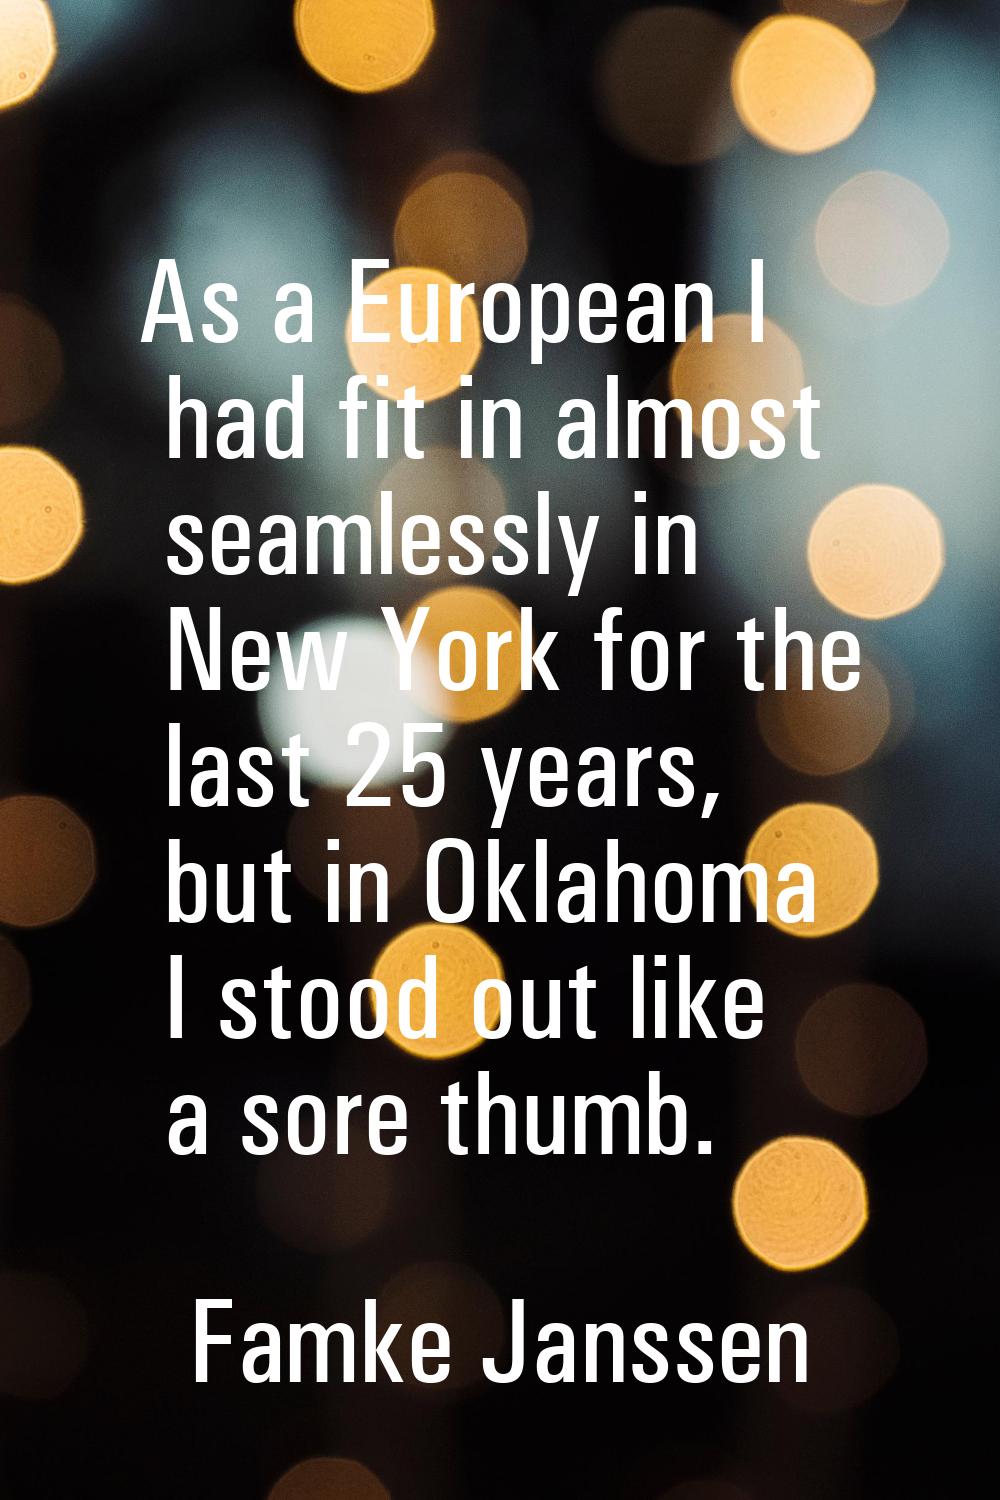 As a European I had fit in almost seamlessly in New York for the last 25 years, but in Oklahoma I s